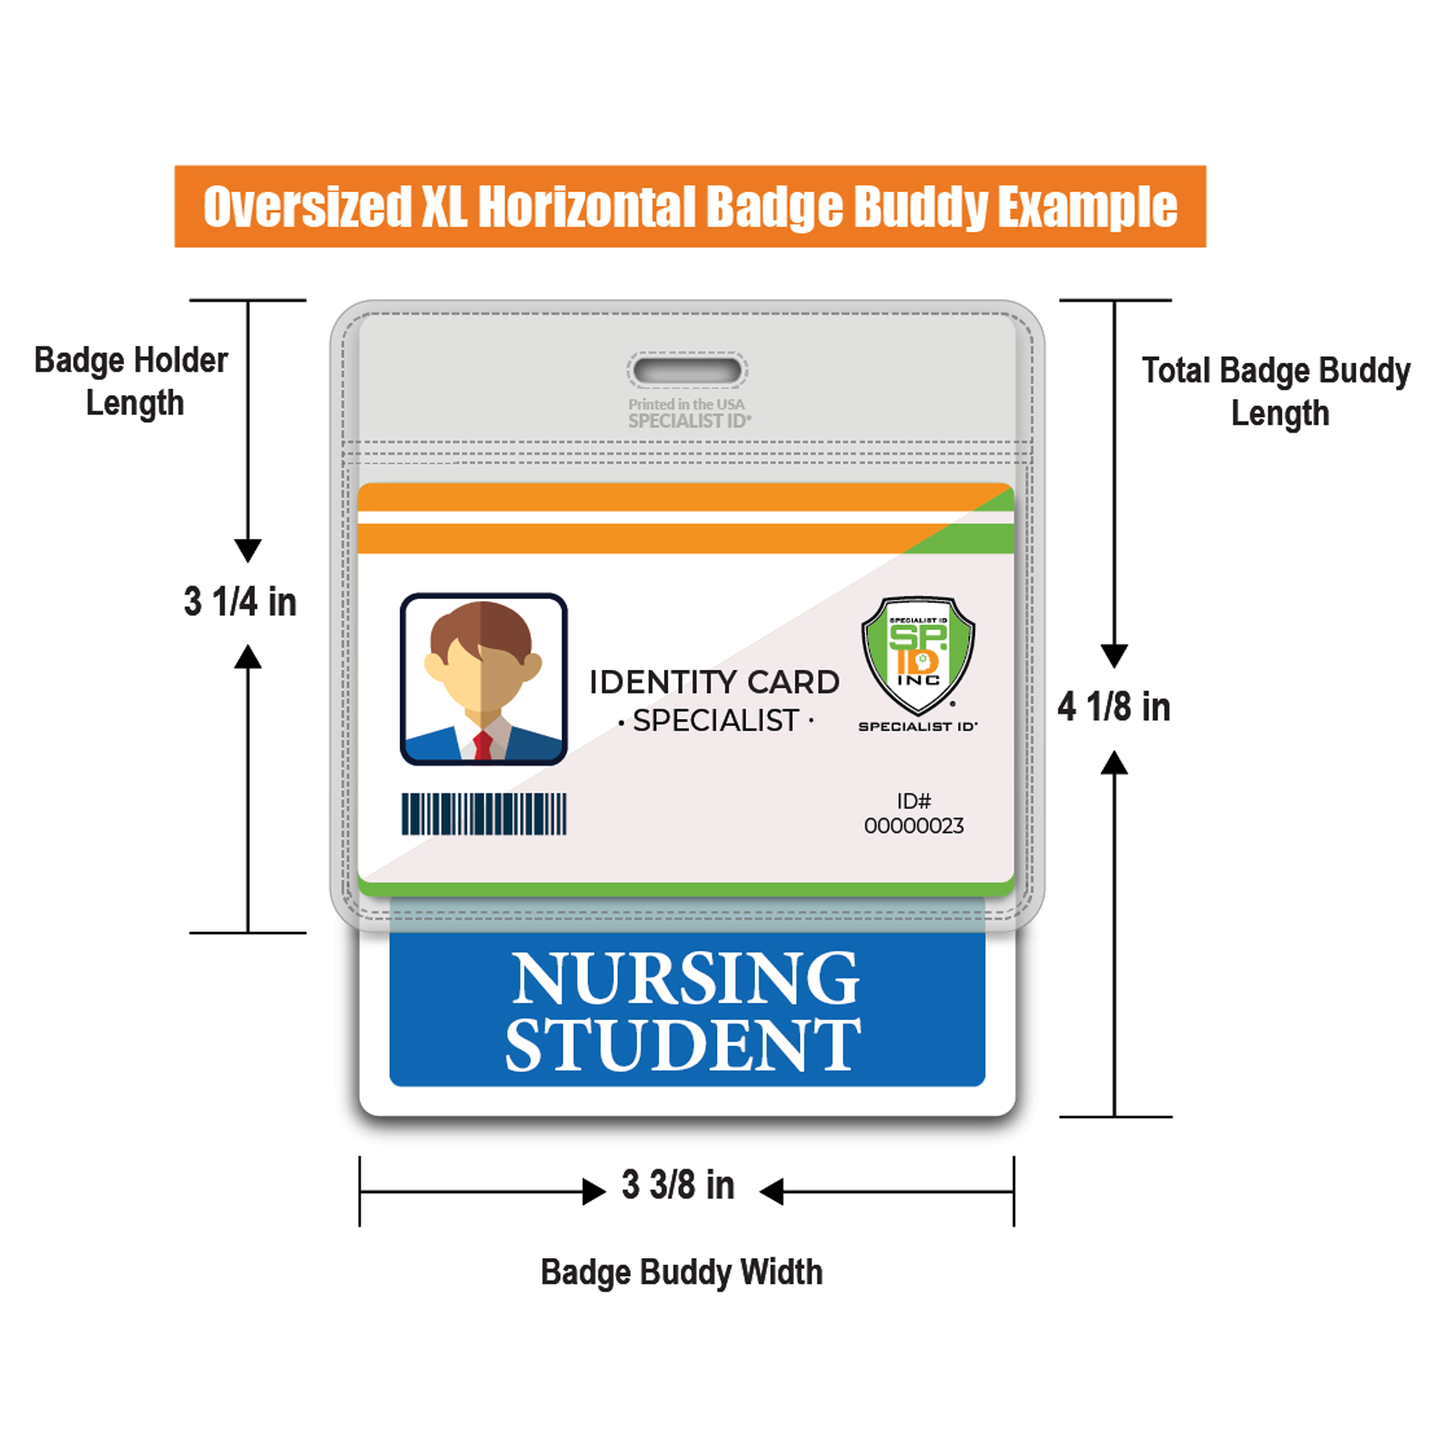 A sample "Oversized NURSING STUDENT Badge Buddy - XL Badge Backer for Nursing Students - Horizontal Hospital ID Badge Buddies," perfect for nursing education programs and clinical settings, showing dimensions: Badge Holder Length 3 1/4 in, Total Badge Buddy Length 4 1/8 in, Badge Buddy Width 3 3/8 in.